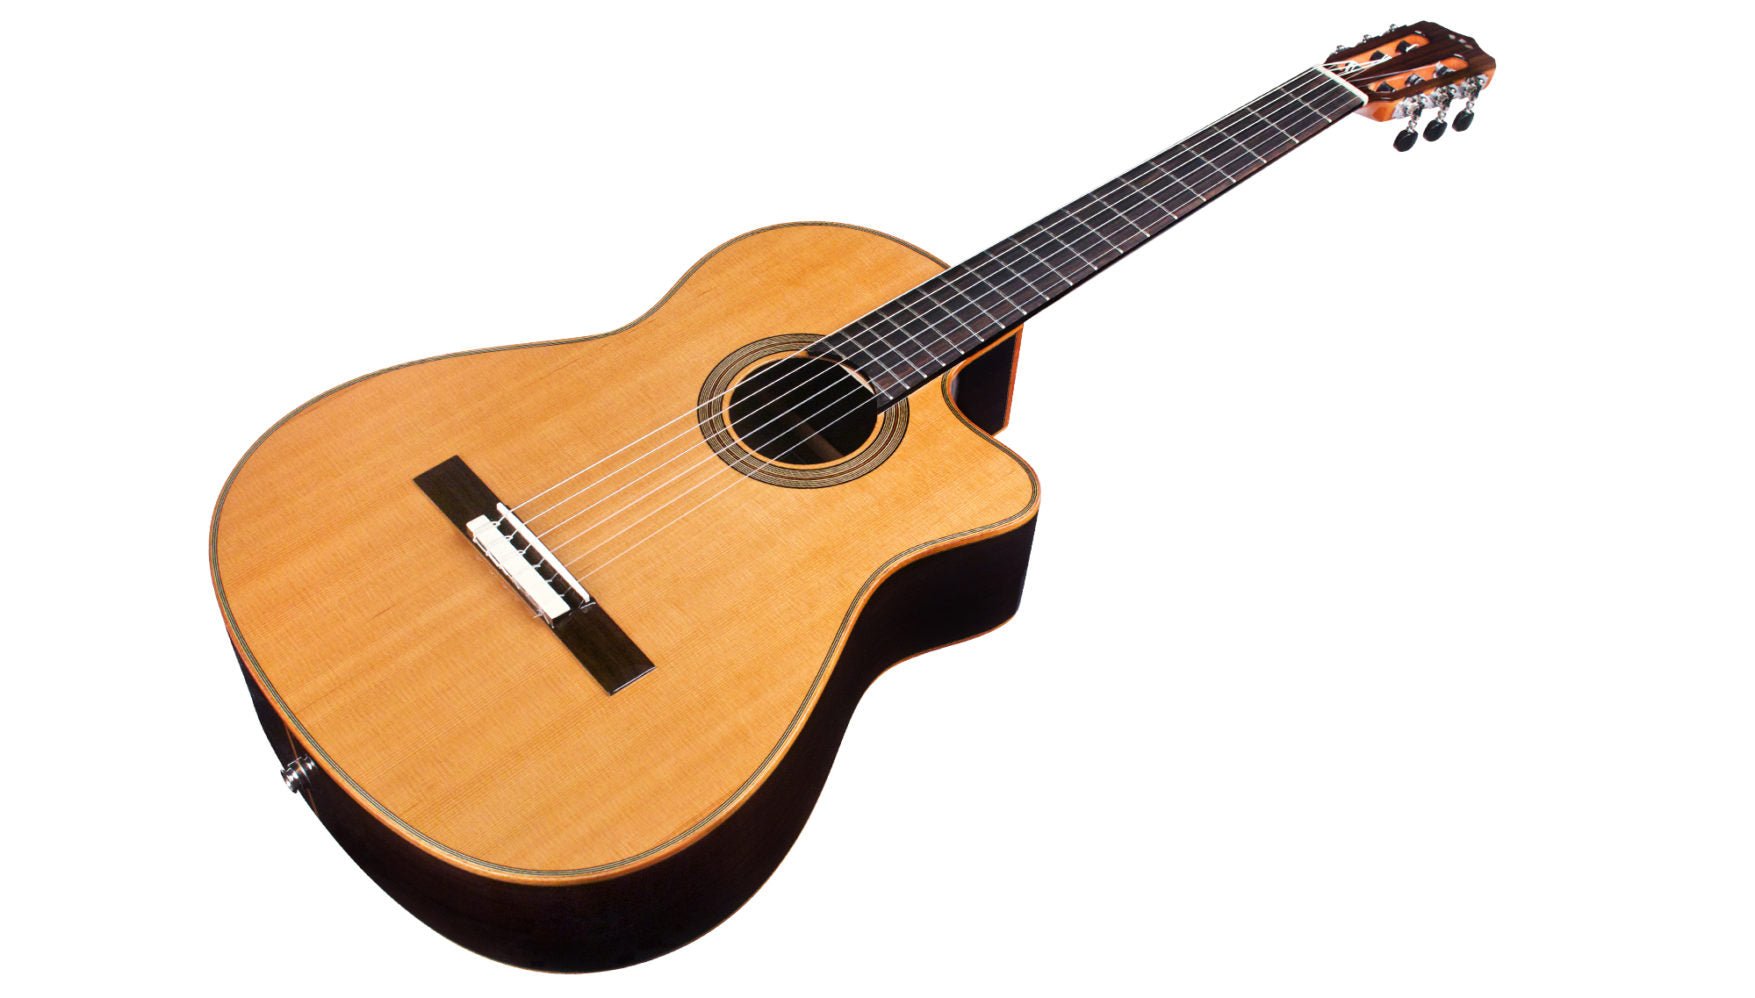 Cordoba Fusion Orchestra CE Cedar - Solid Canadian Cedar Top, Rosewood Back & Sides with Pickup | CORDOBA , Zoso Music